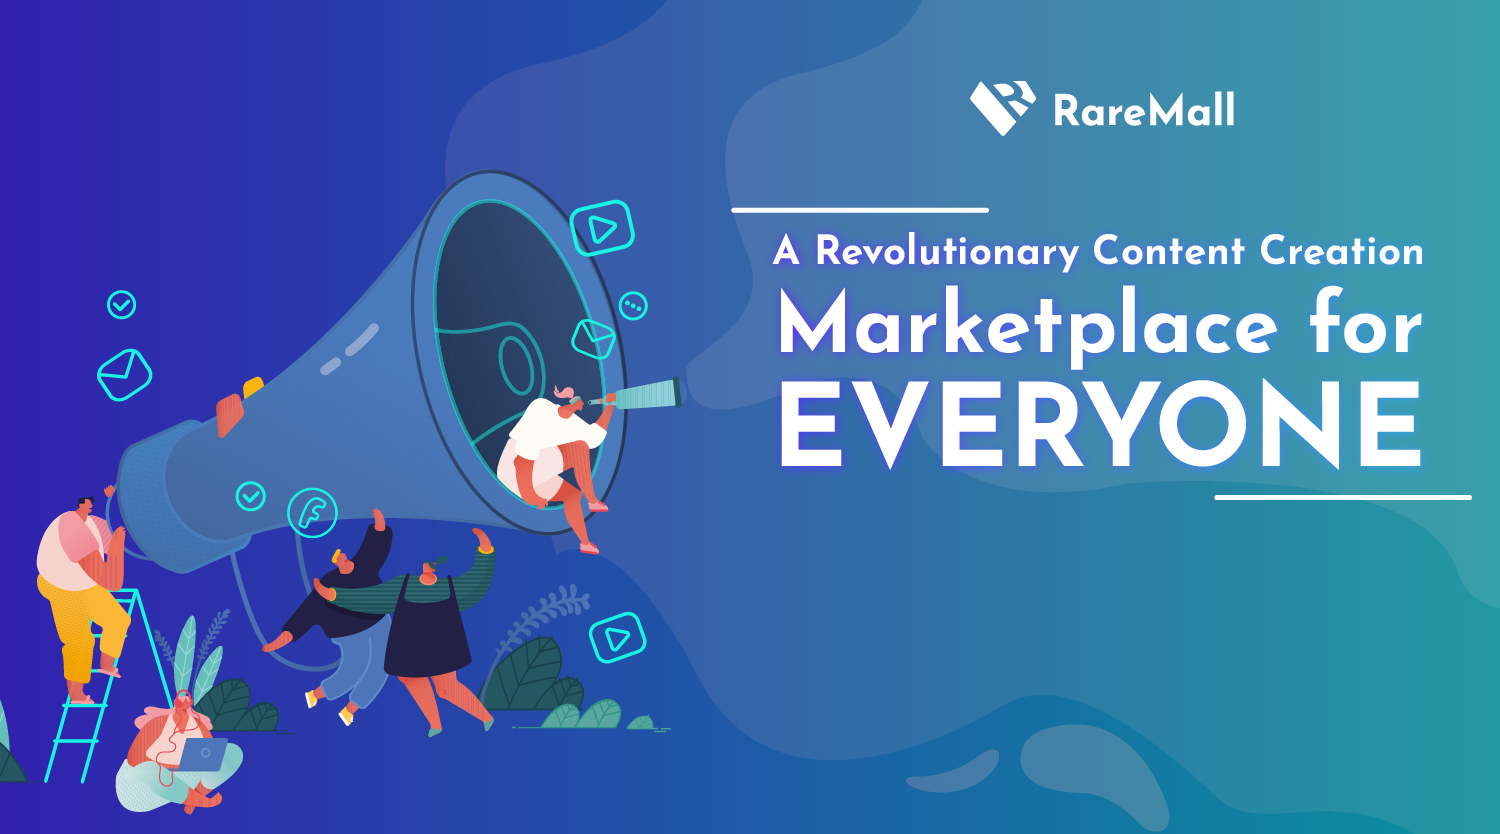 Official Launch of RareMall NFT Marketplace - The Revolutionary Content Creation Platform for Everyone